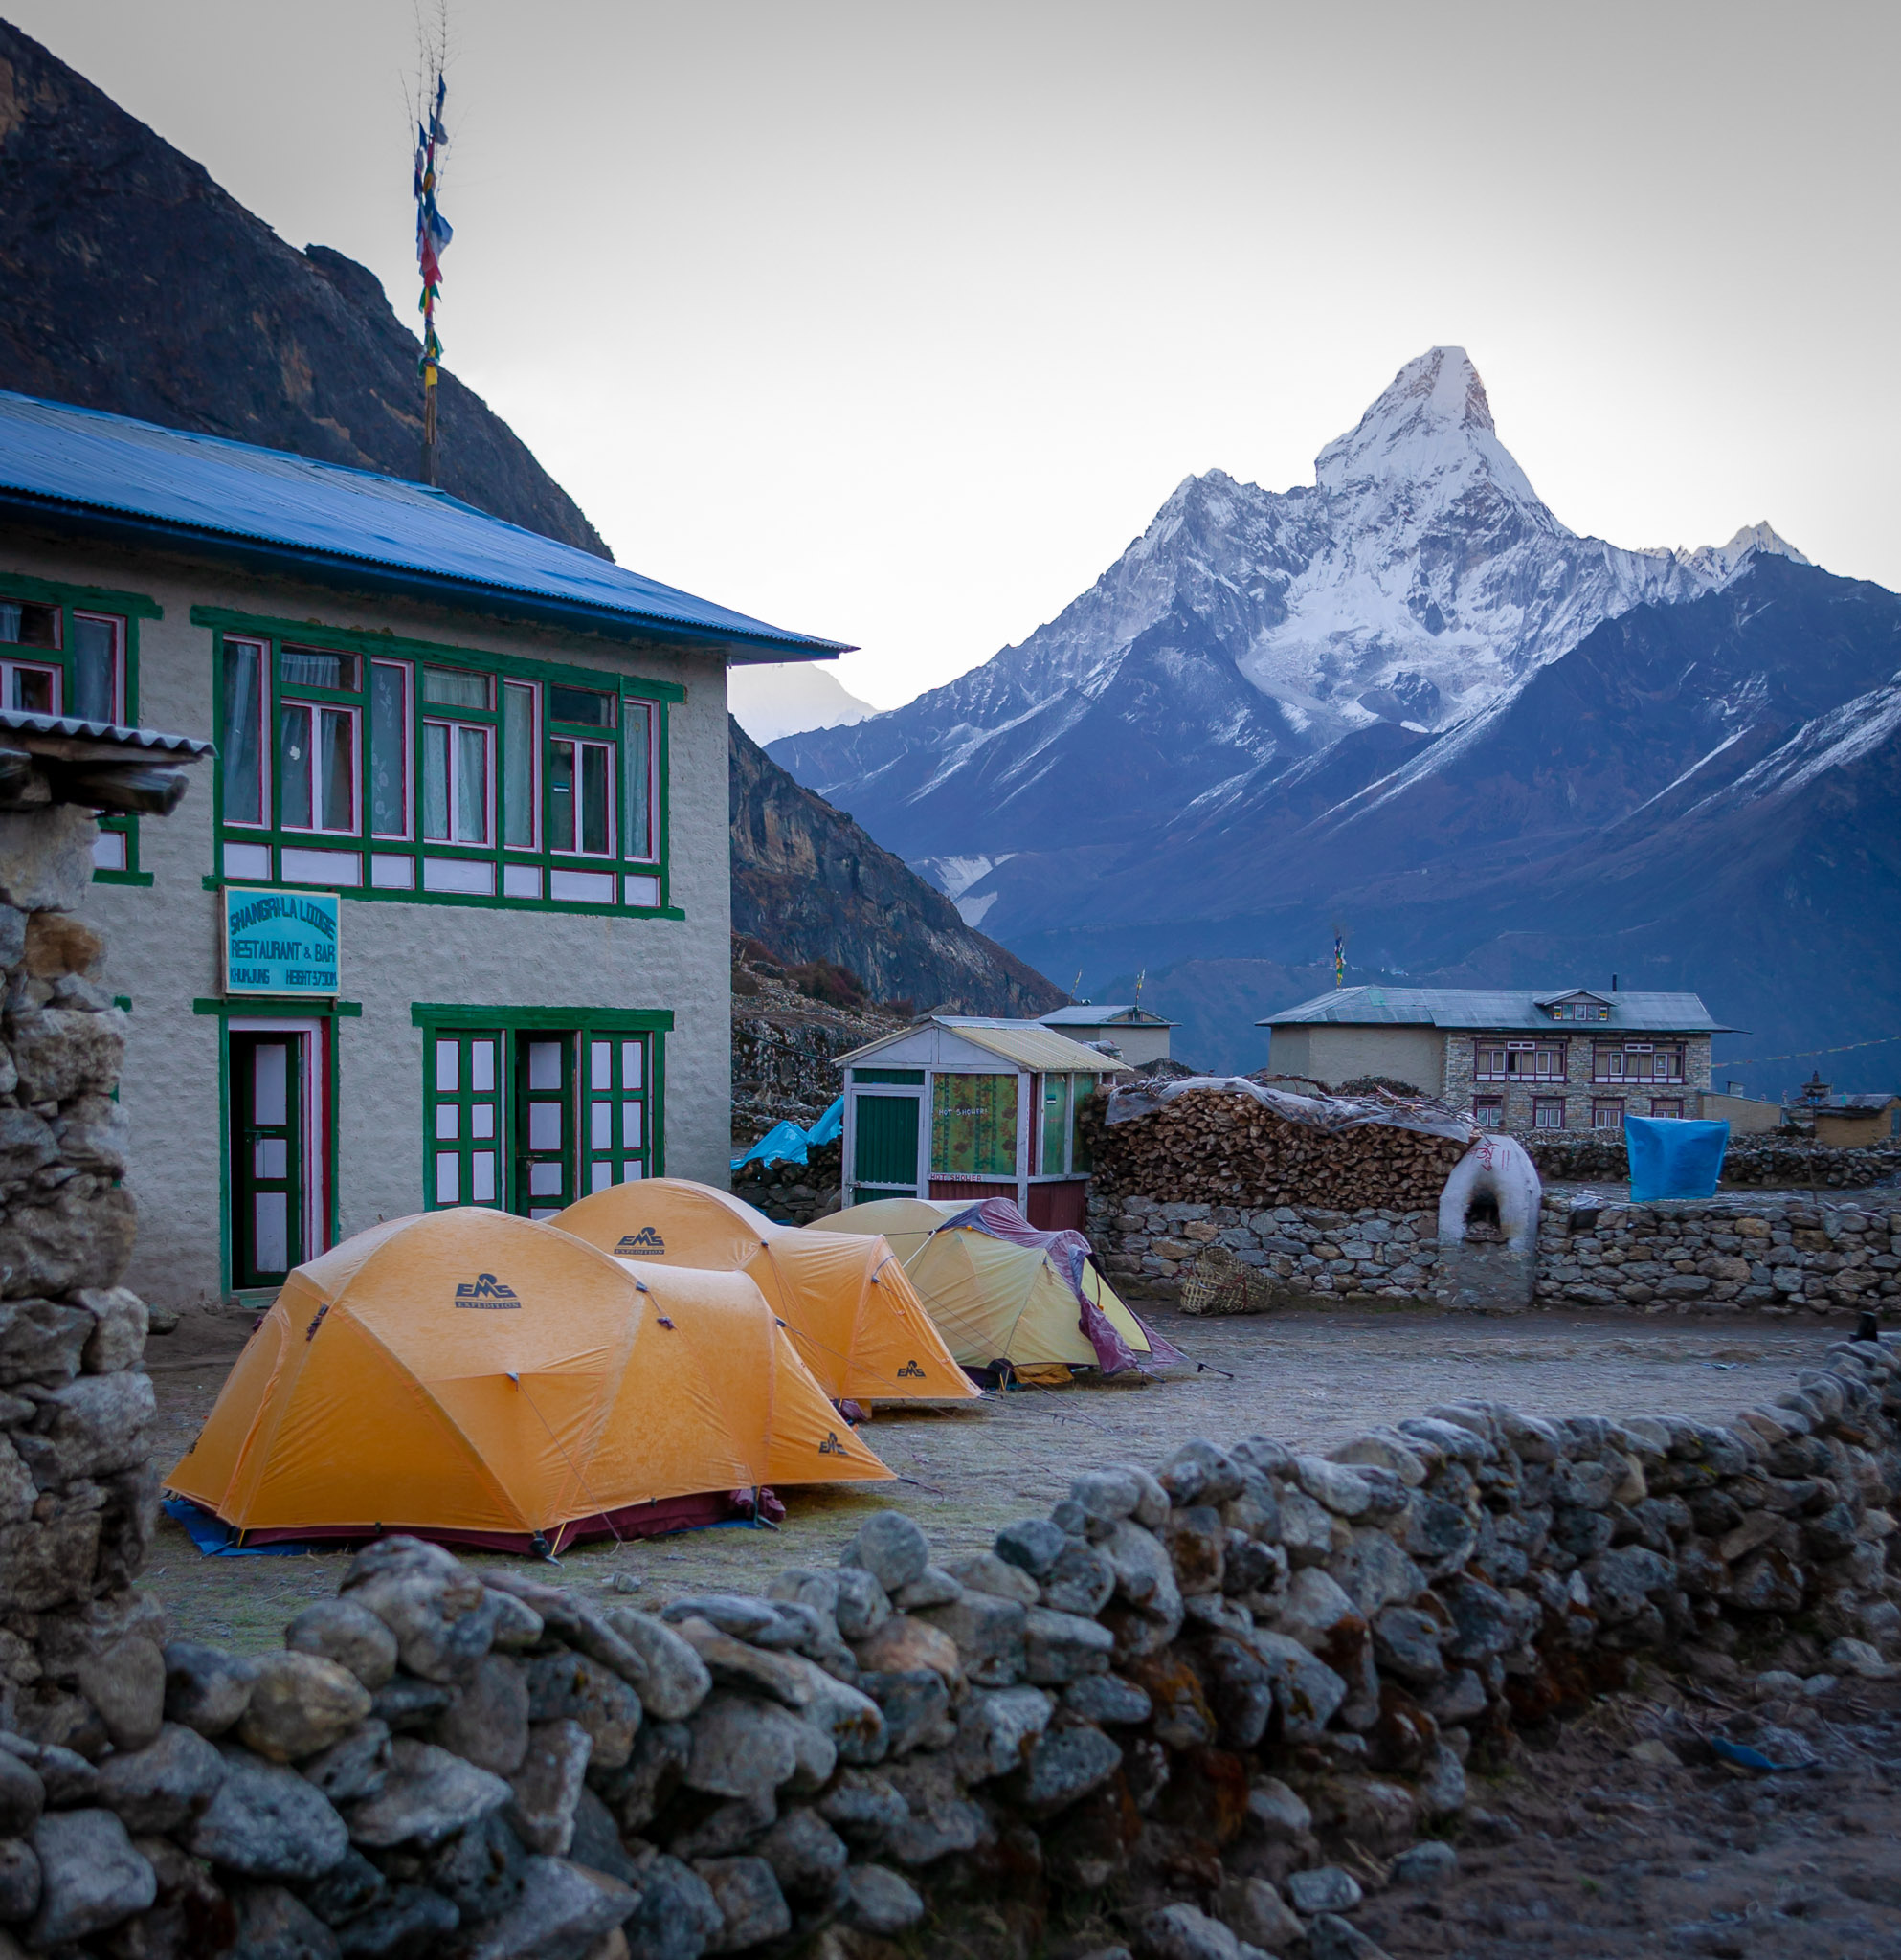 Our campsite in Khumjung, with Ama Dablam in background